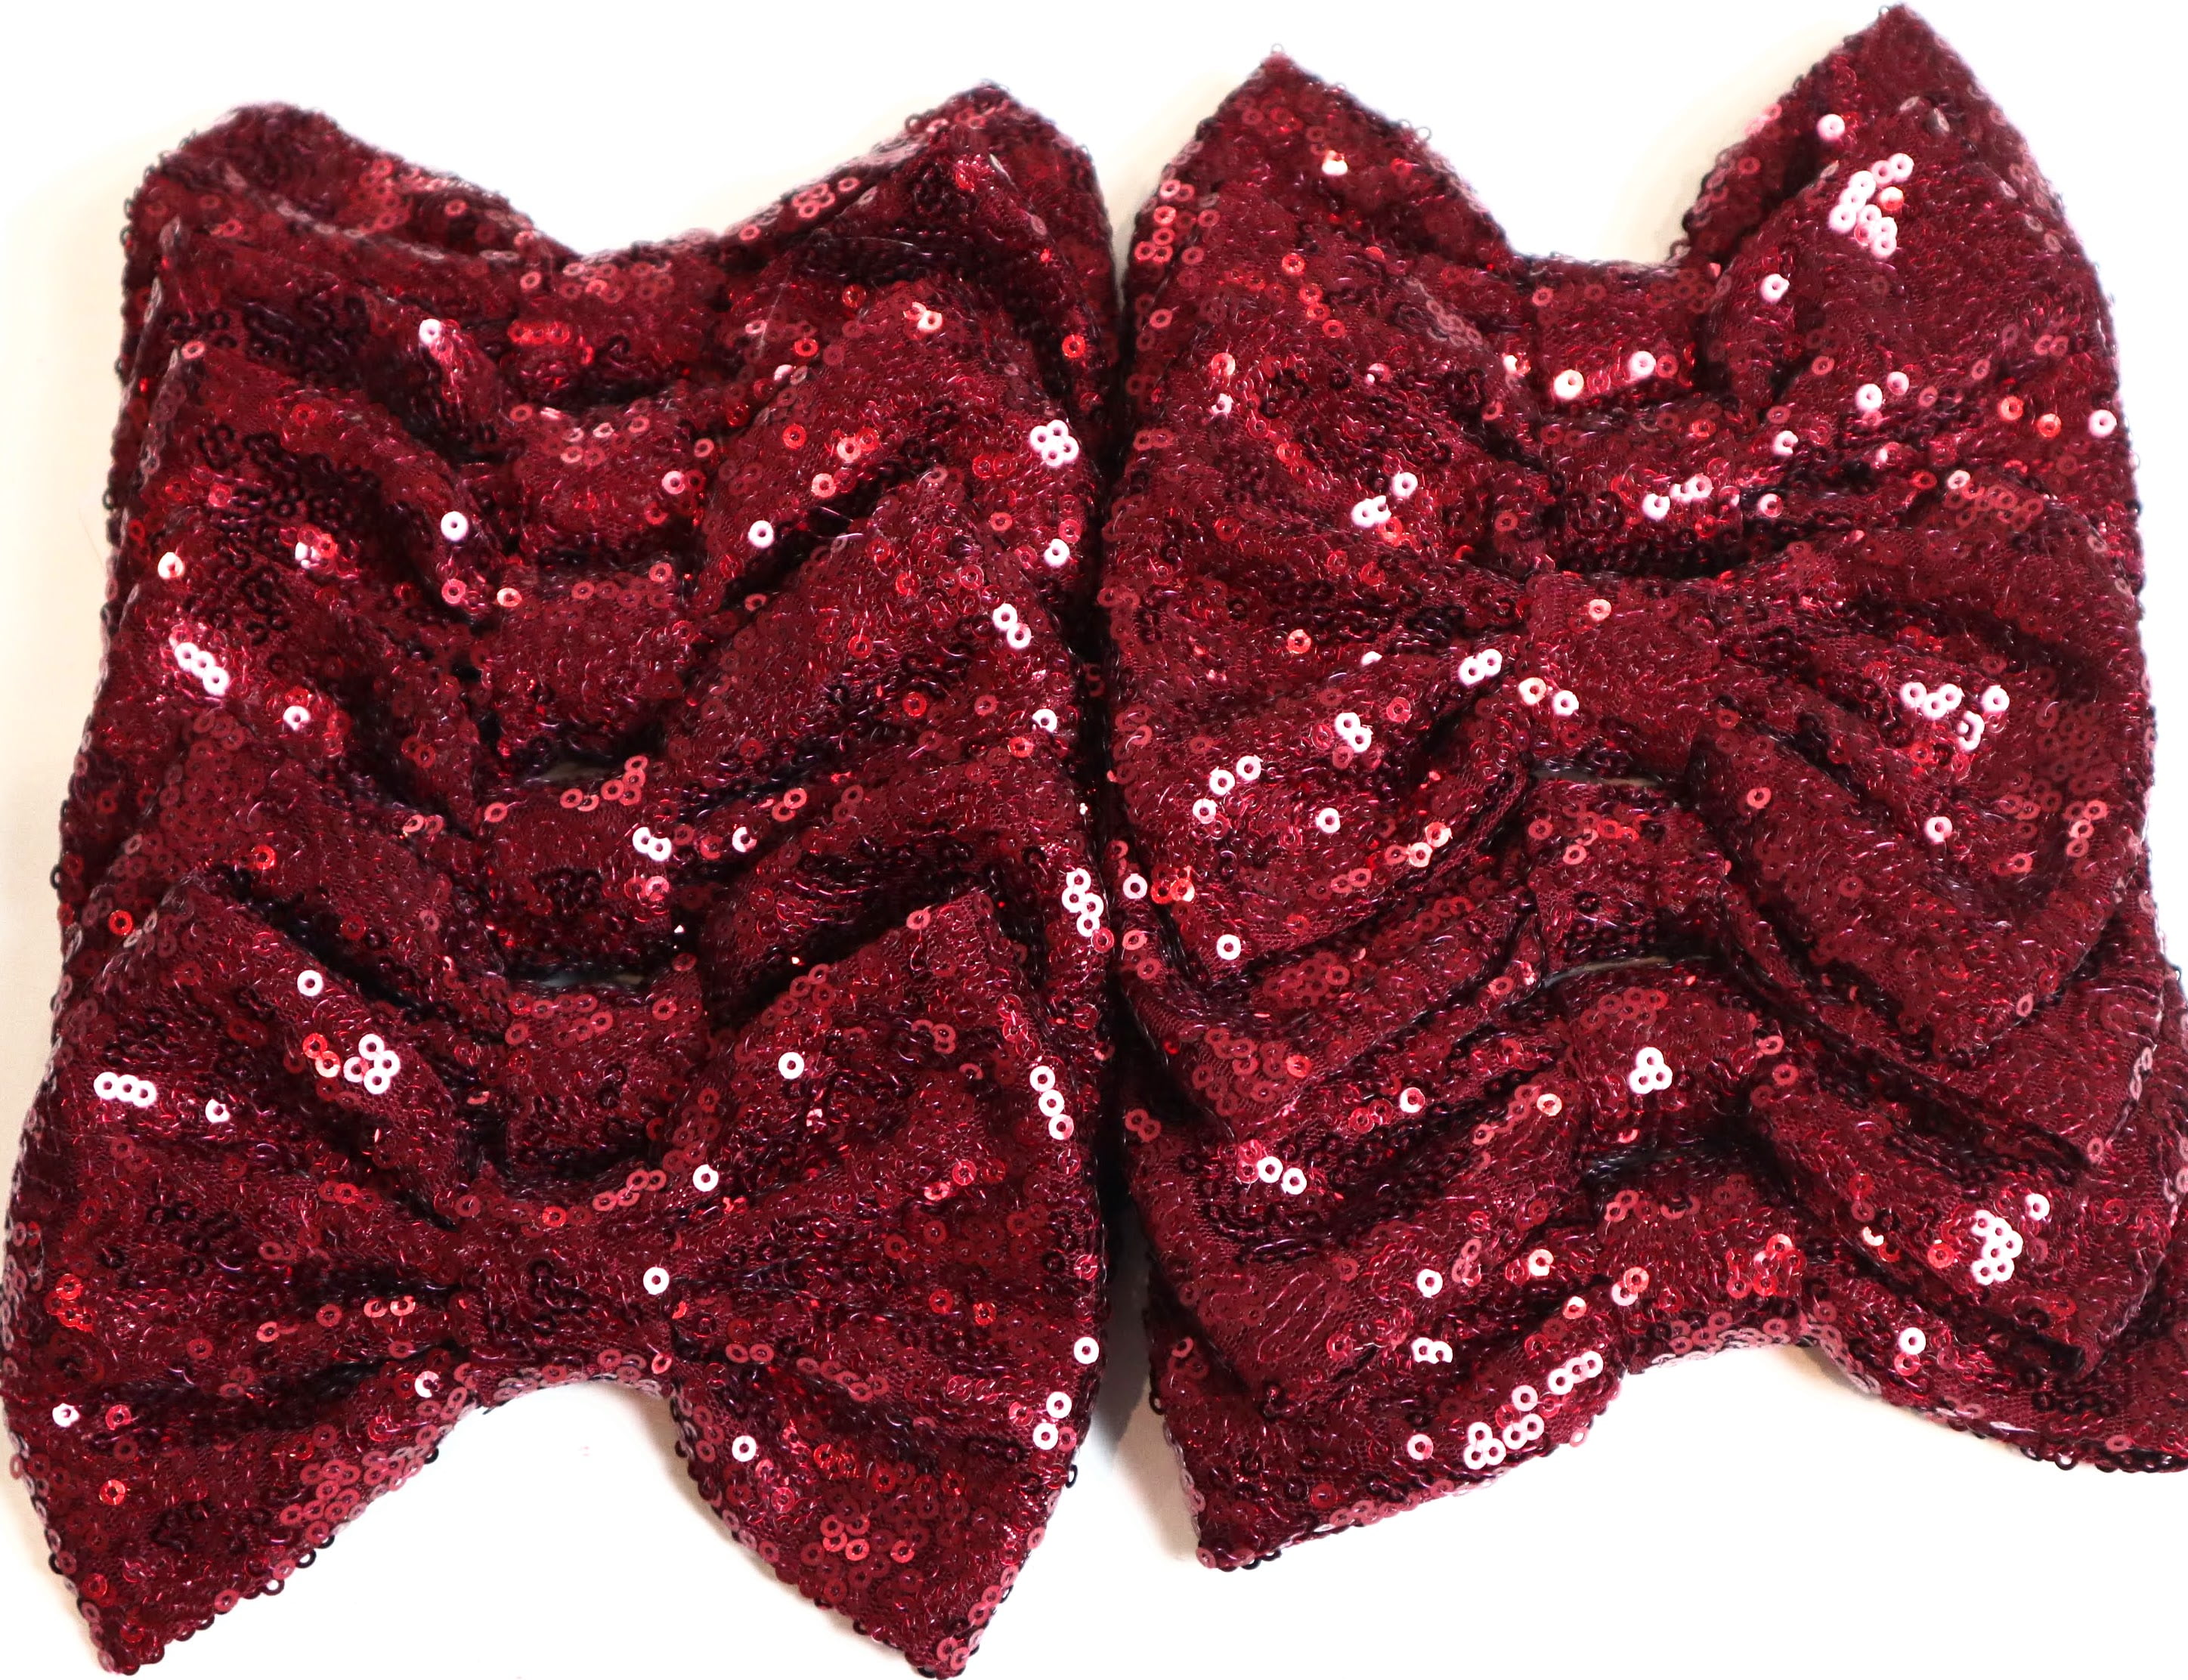 Set of 12 Large 5 inches Orange Halloween Sequin Bows,DIY Wholesale Bows/NO CLIP